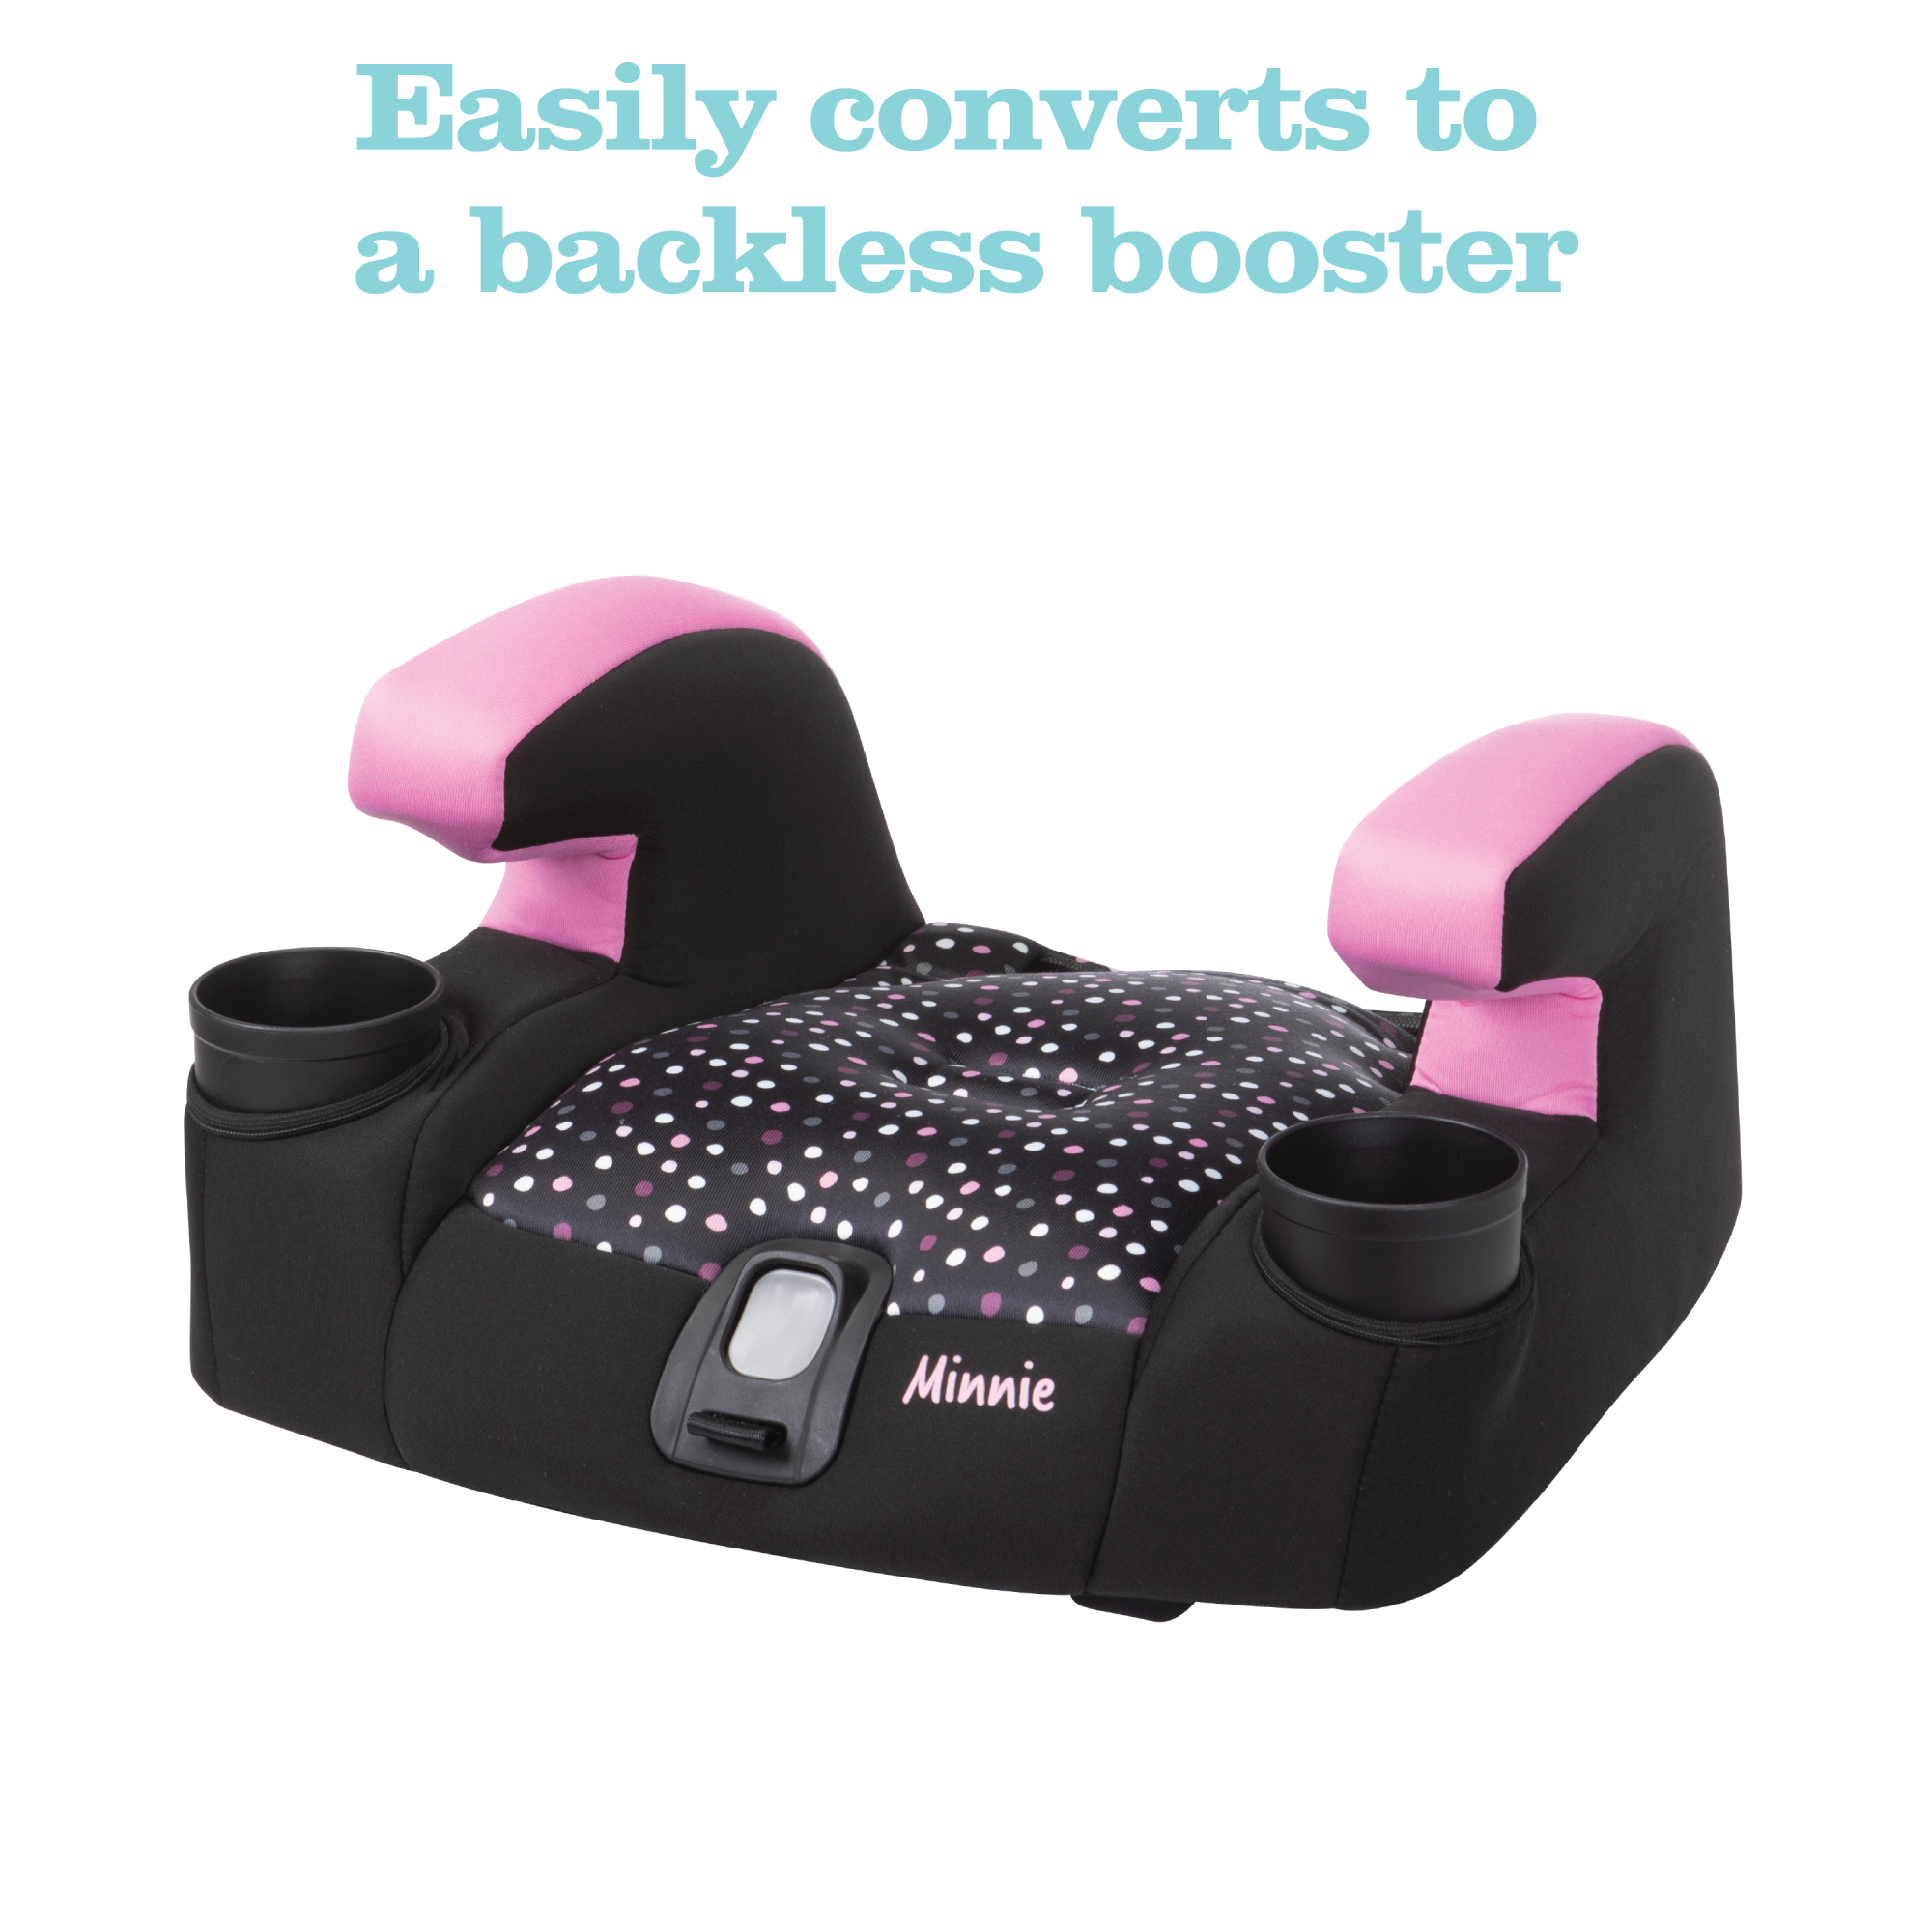 Disney Baby MagicSquad 3-in-1 Harness Booster Car Seat - Minnie Dot Party - easily converts to a backless booster